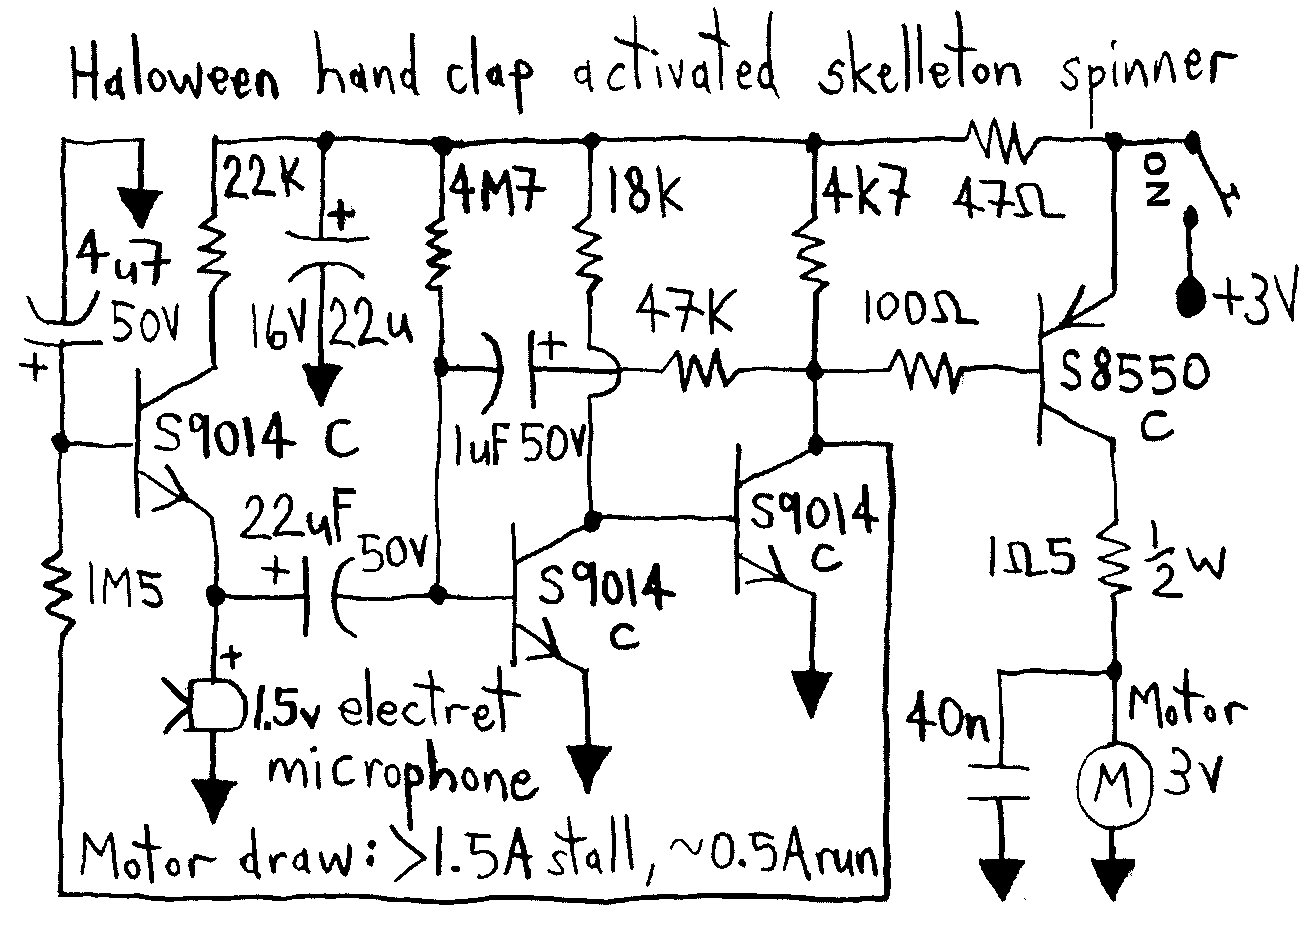 Circuit Diagram aka Schematic reverse engineered from circuit board